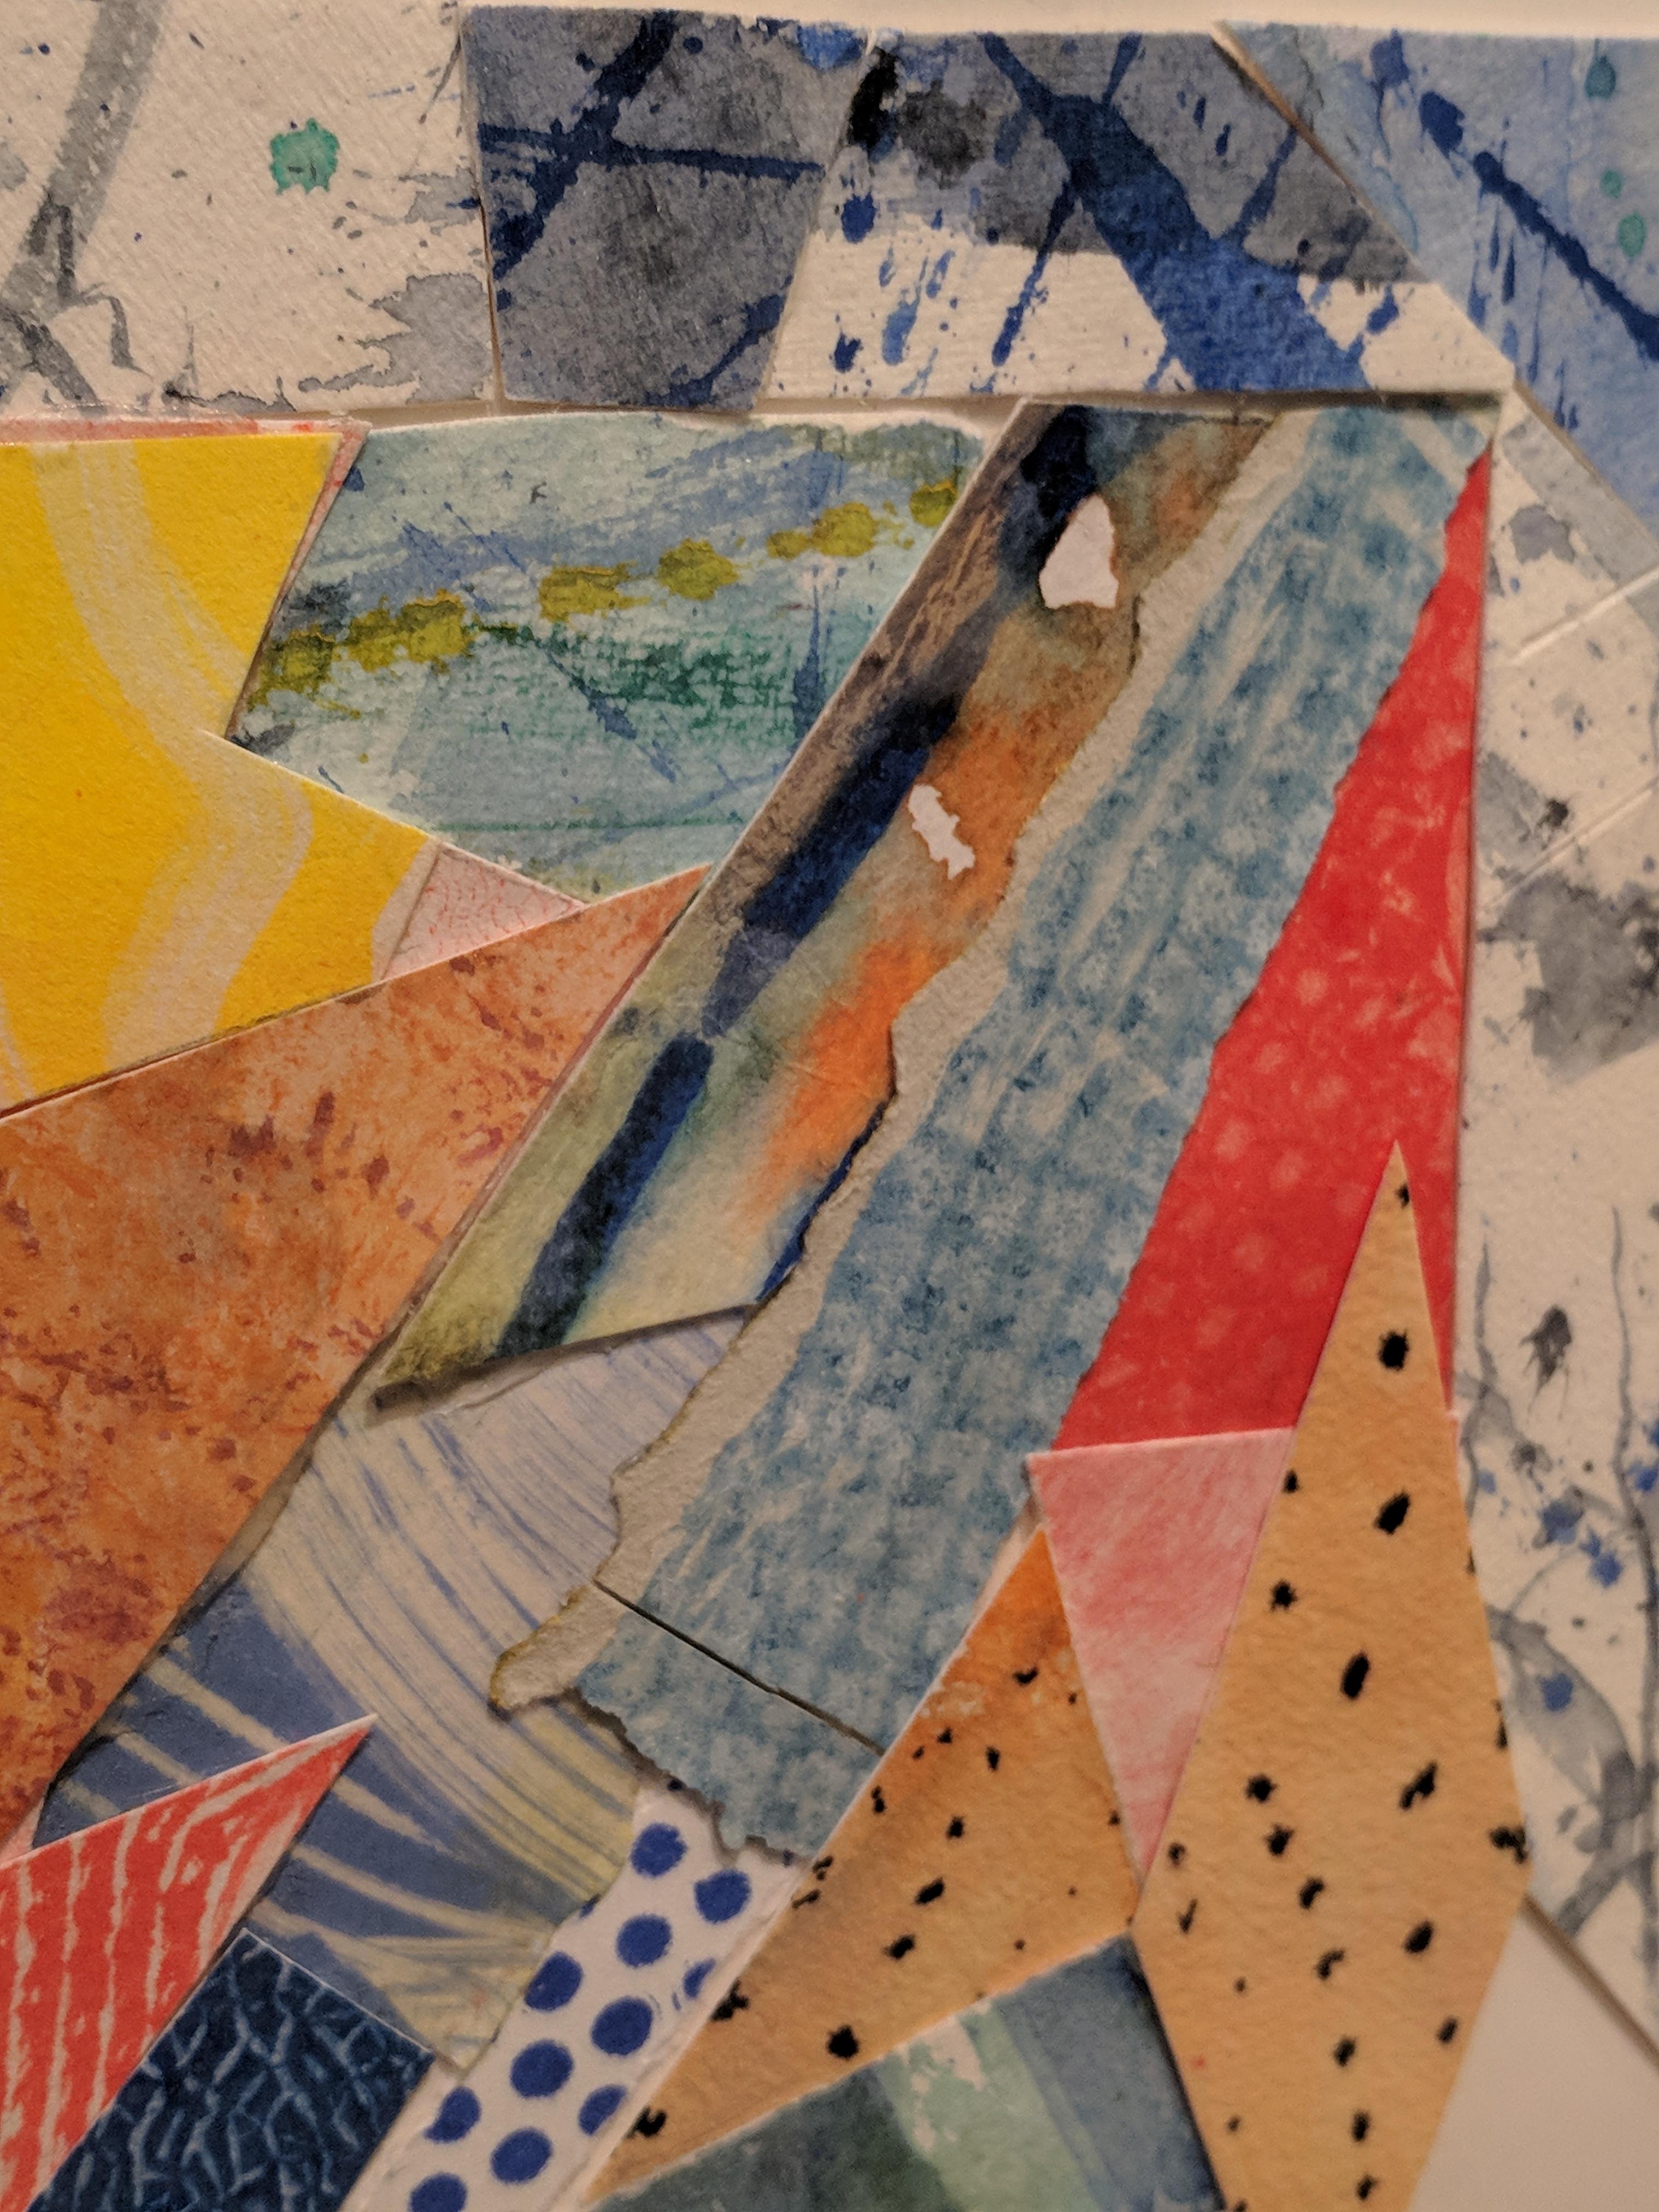 Using mixed-media and paper collage, the artist presents a series of abstract shapes. With blues predominating, the pieces of the collage are from some of the artist's earlier paintings. Some of the pieces resemble textile, thus providing